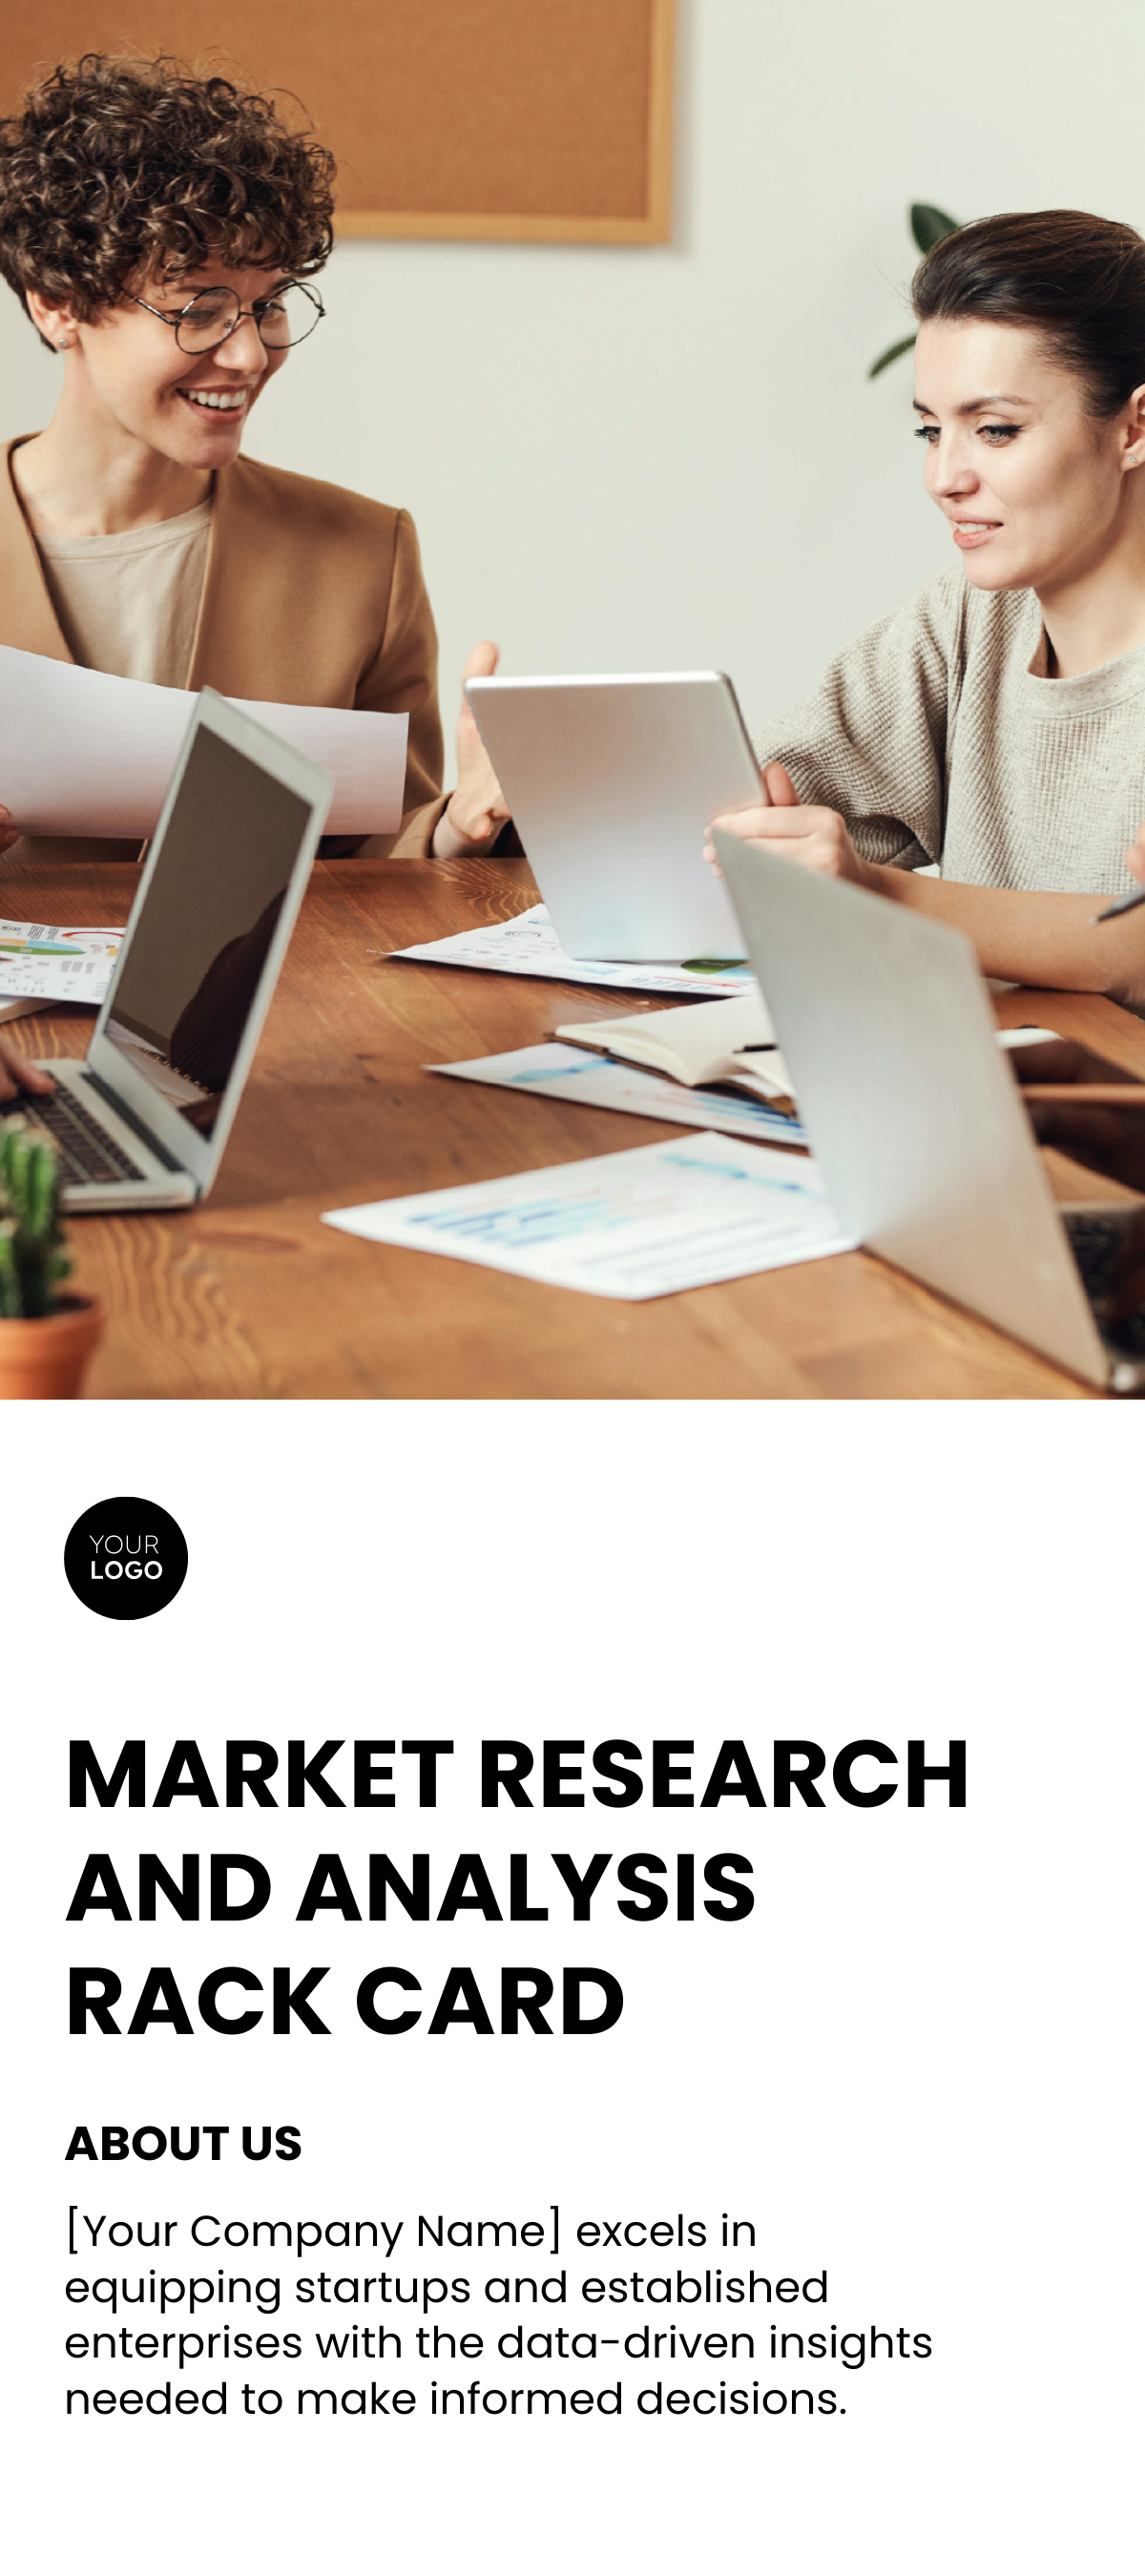 Market Research and Analysis Rack Card